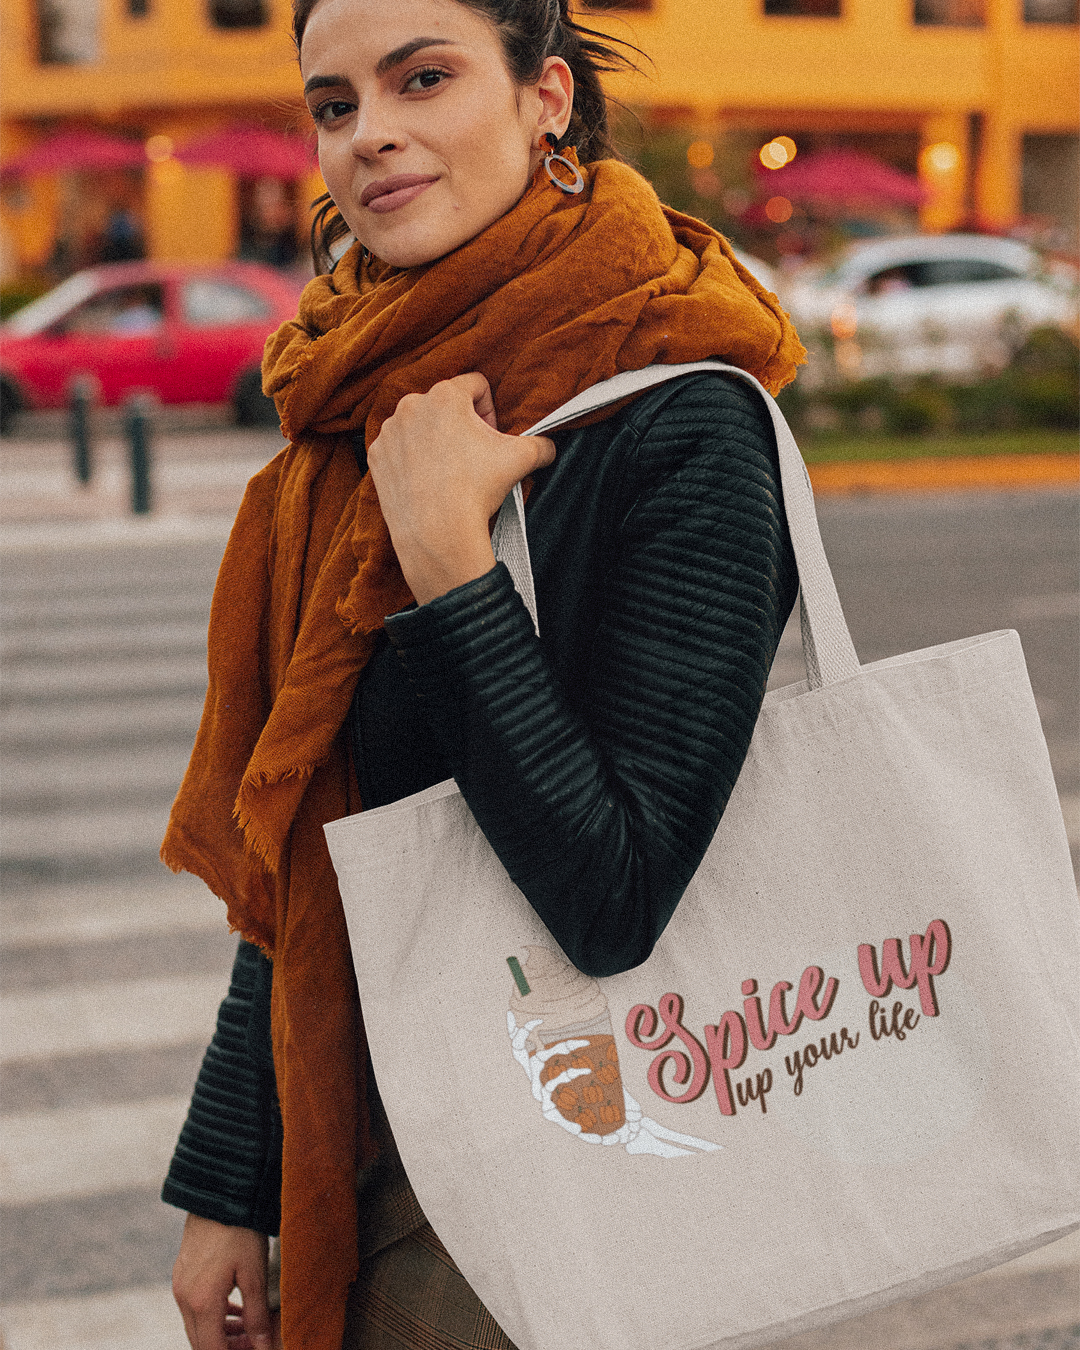 Spice Up Your Life Tote Bag - Spooky Season Skeleton's Hand Pumpkin Spiced Latte Tote Bag - Halloween Pumpkin Spiced Latte Shopper Tote Bag - Pumpkin Spiced Latte Tote Bag Shopper